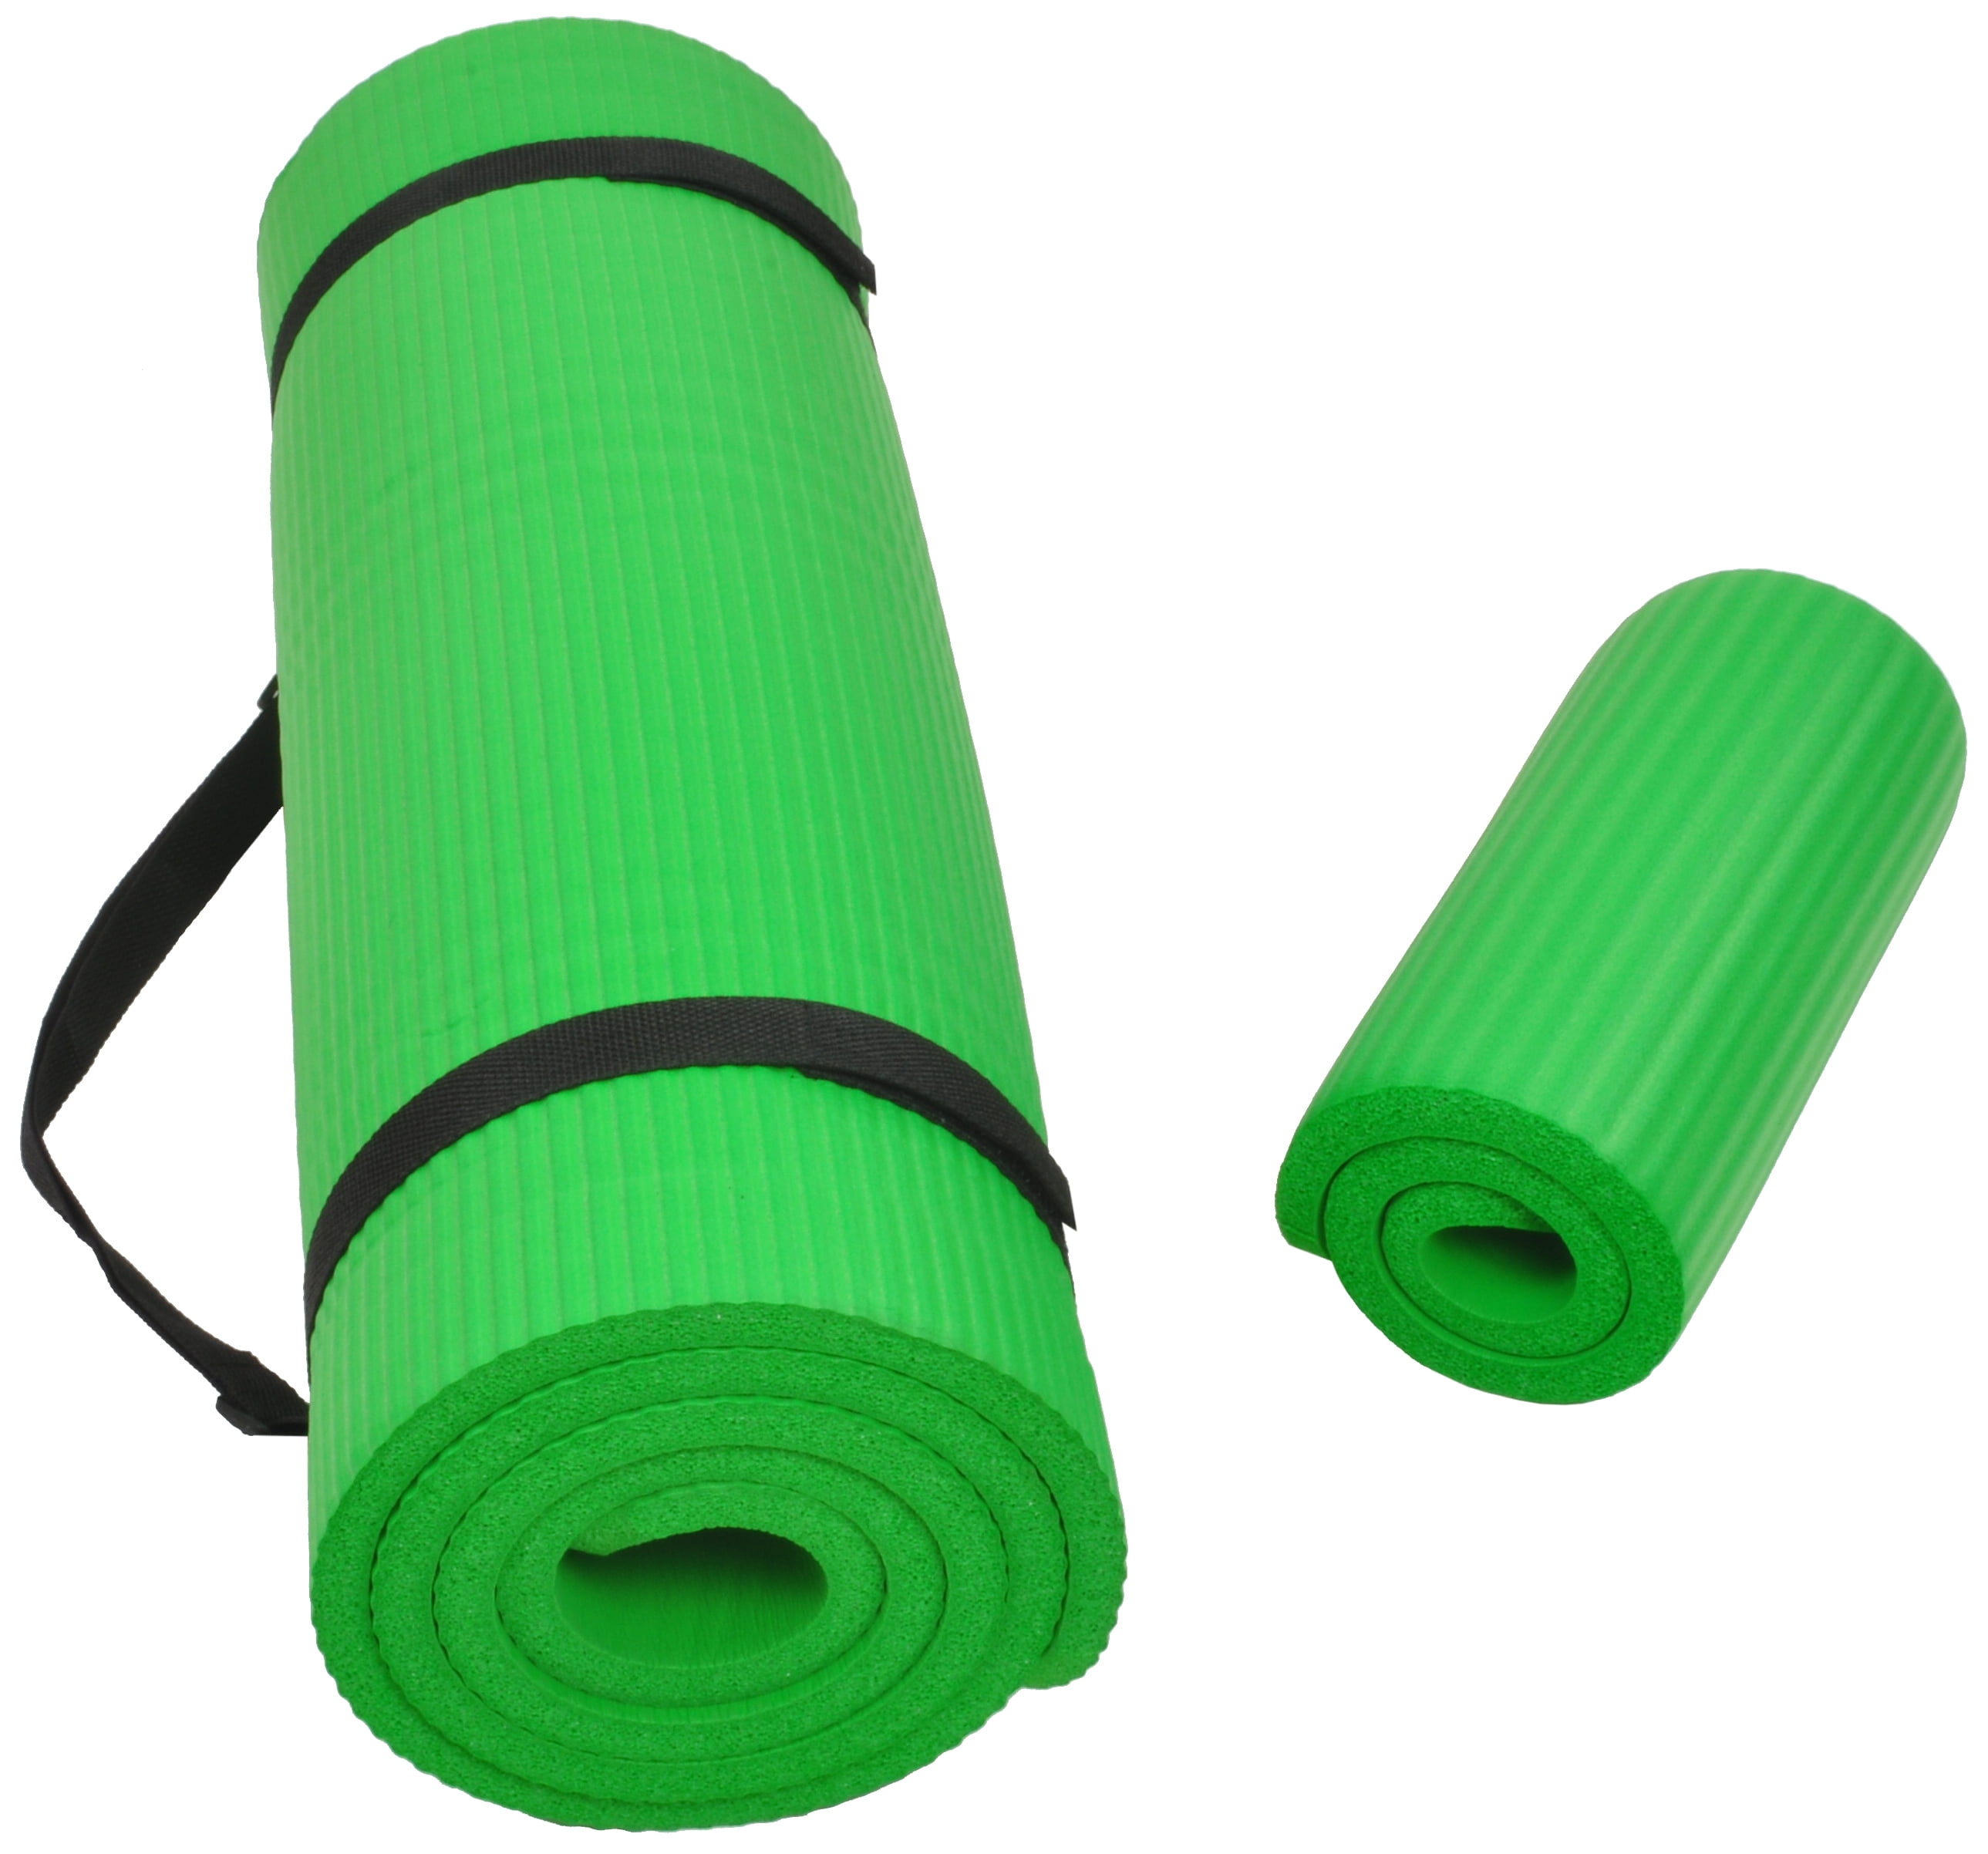 Yoga Mat All-Purpose 1/2-Inch Extra Thick High Density Anti-Tear 